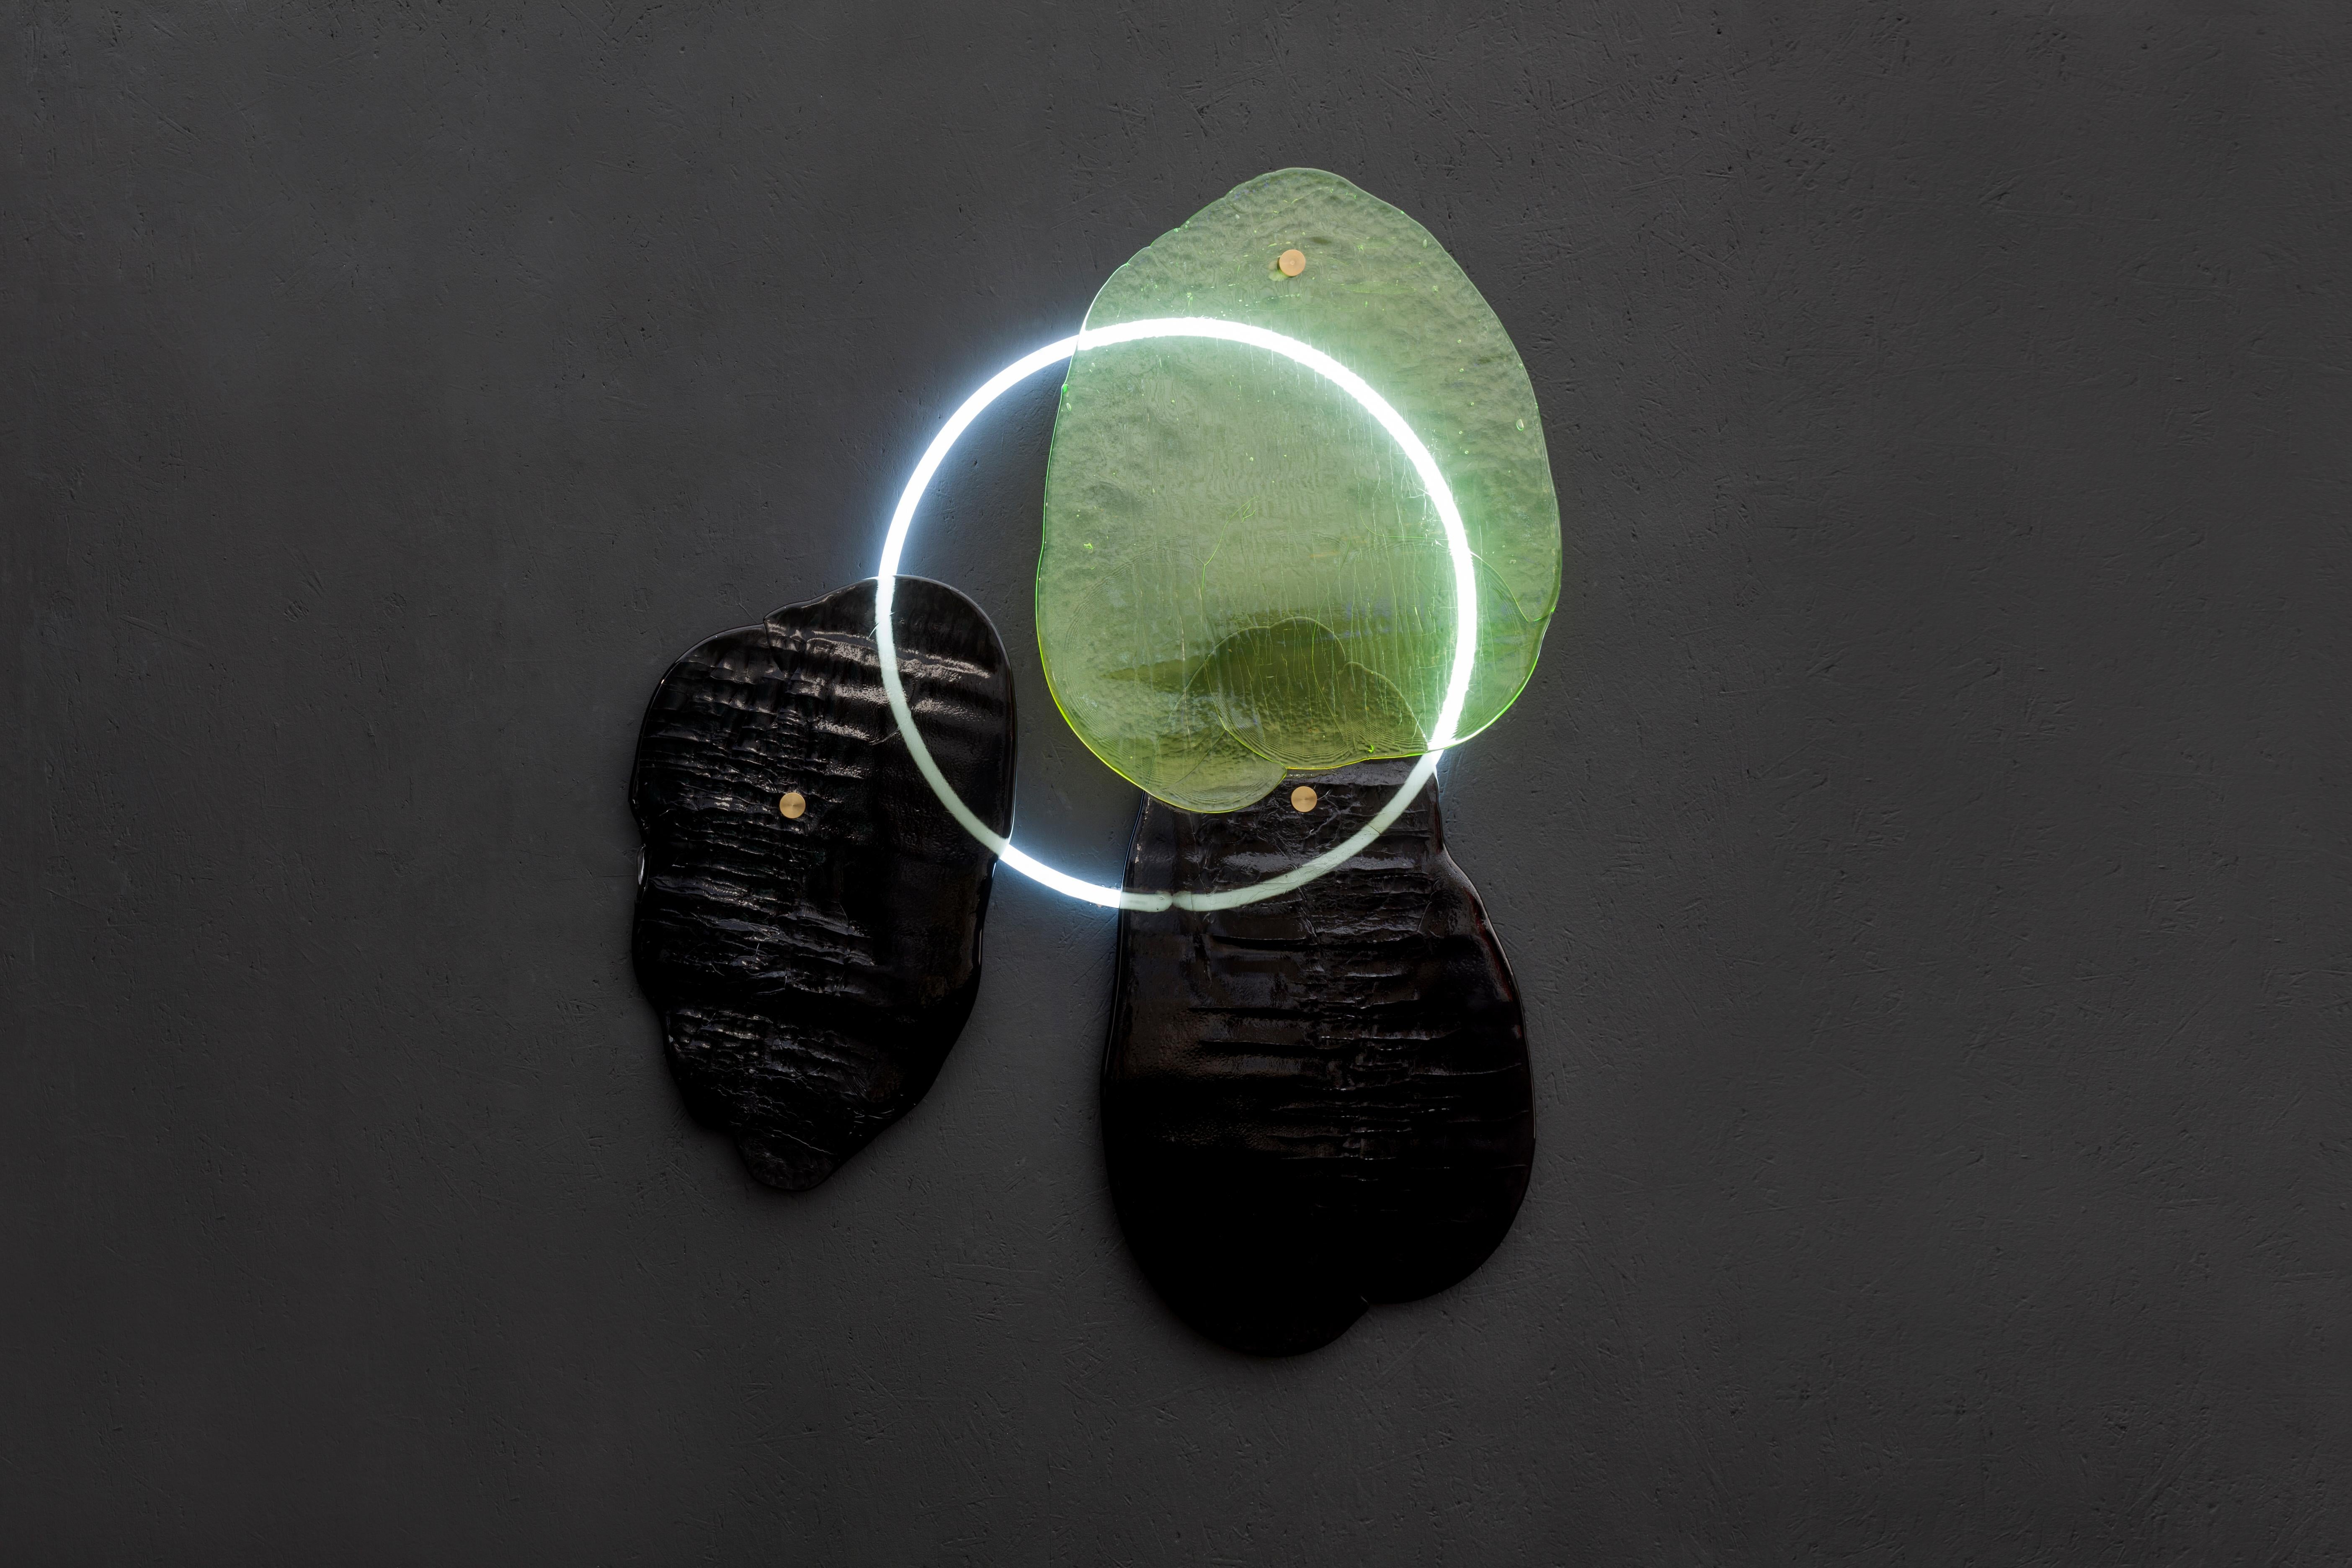 Cloud object by Dechem Studio.
Dimensions: D 8 x W 110 x H 130 cm.
Materials: glass, neon light ring.

Like clouds passing over the sun, translucent glass sheets diffuse the light of a neon tube in this wall object. The amorphous glass elements